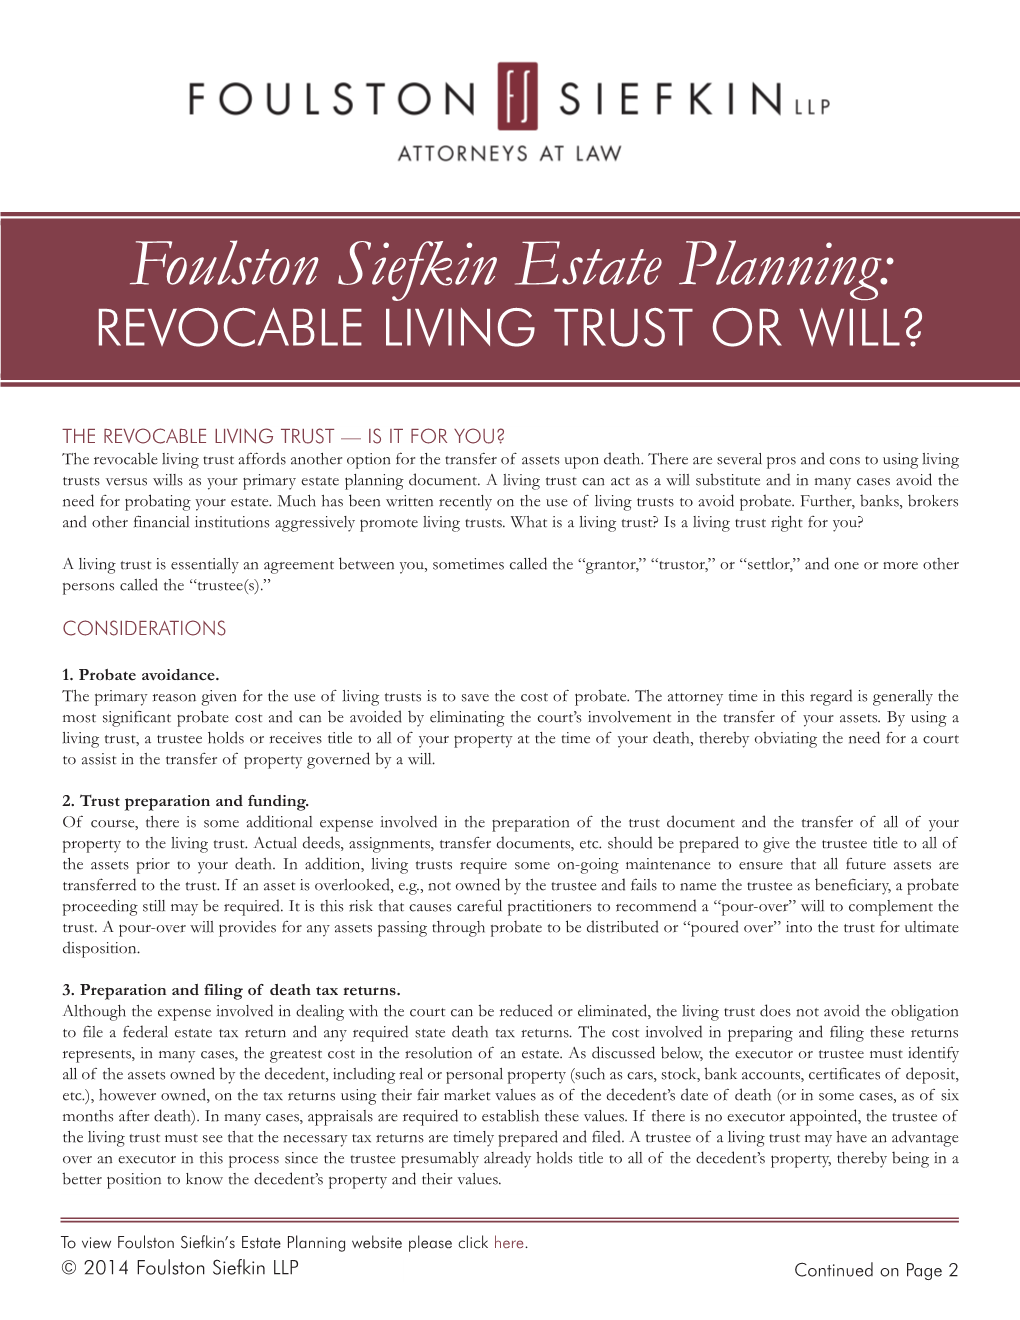 Foulston Siefkin Estate Planning: REVOCABLE LIVING TRUST OR WILL?